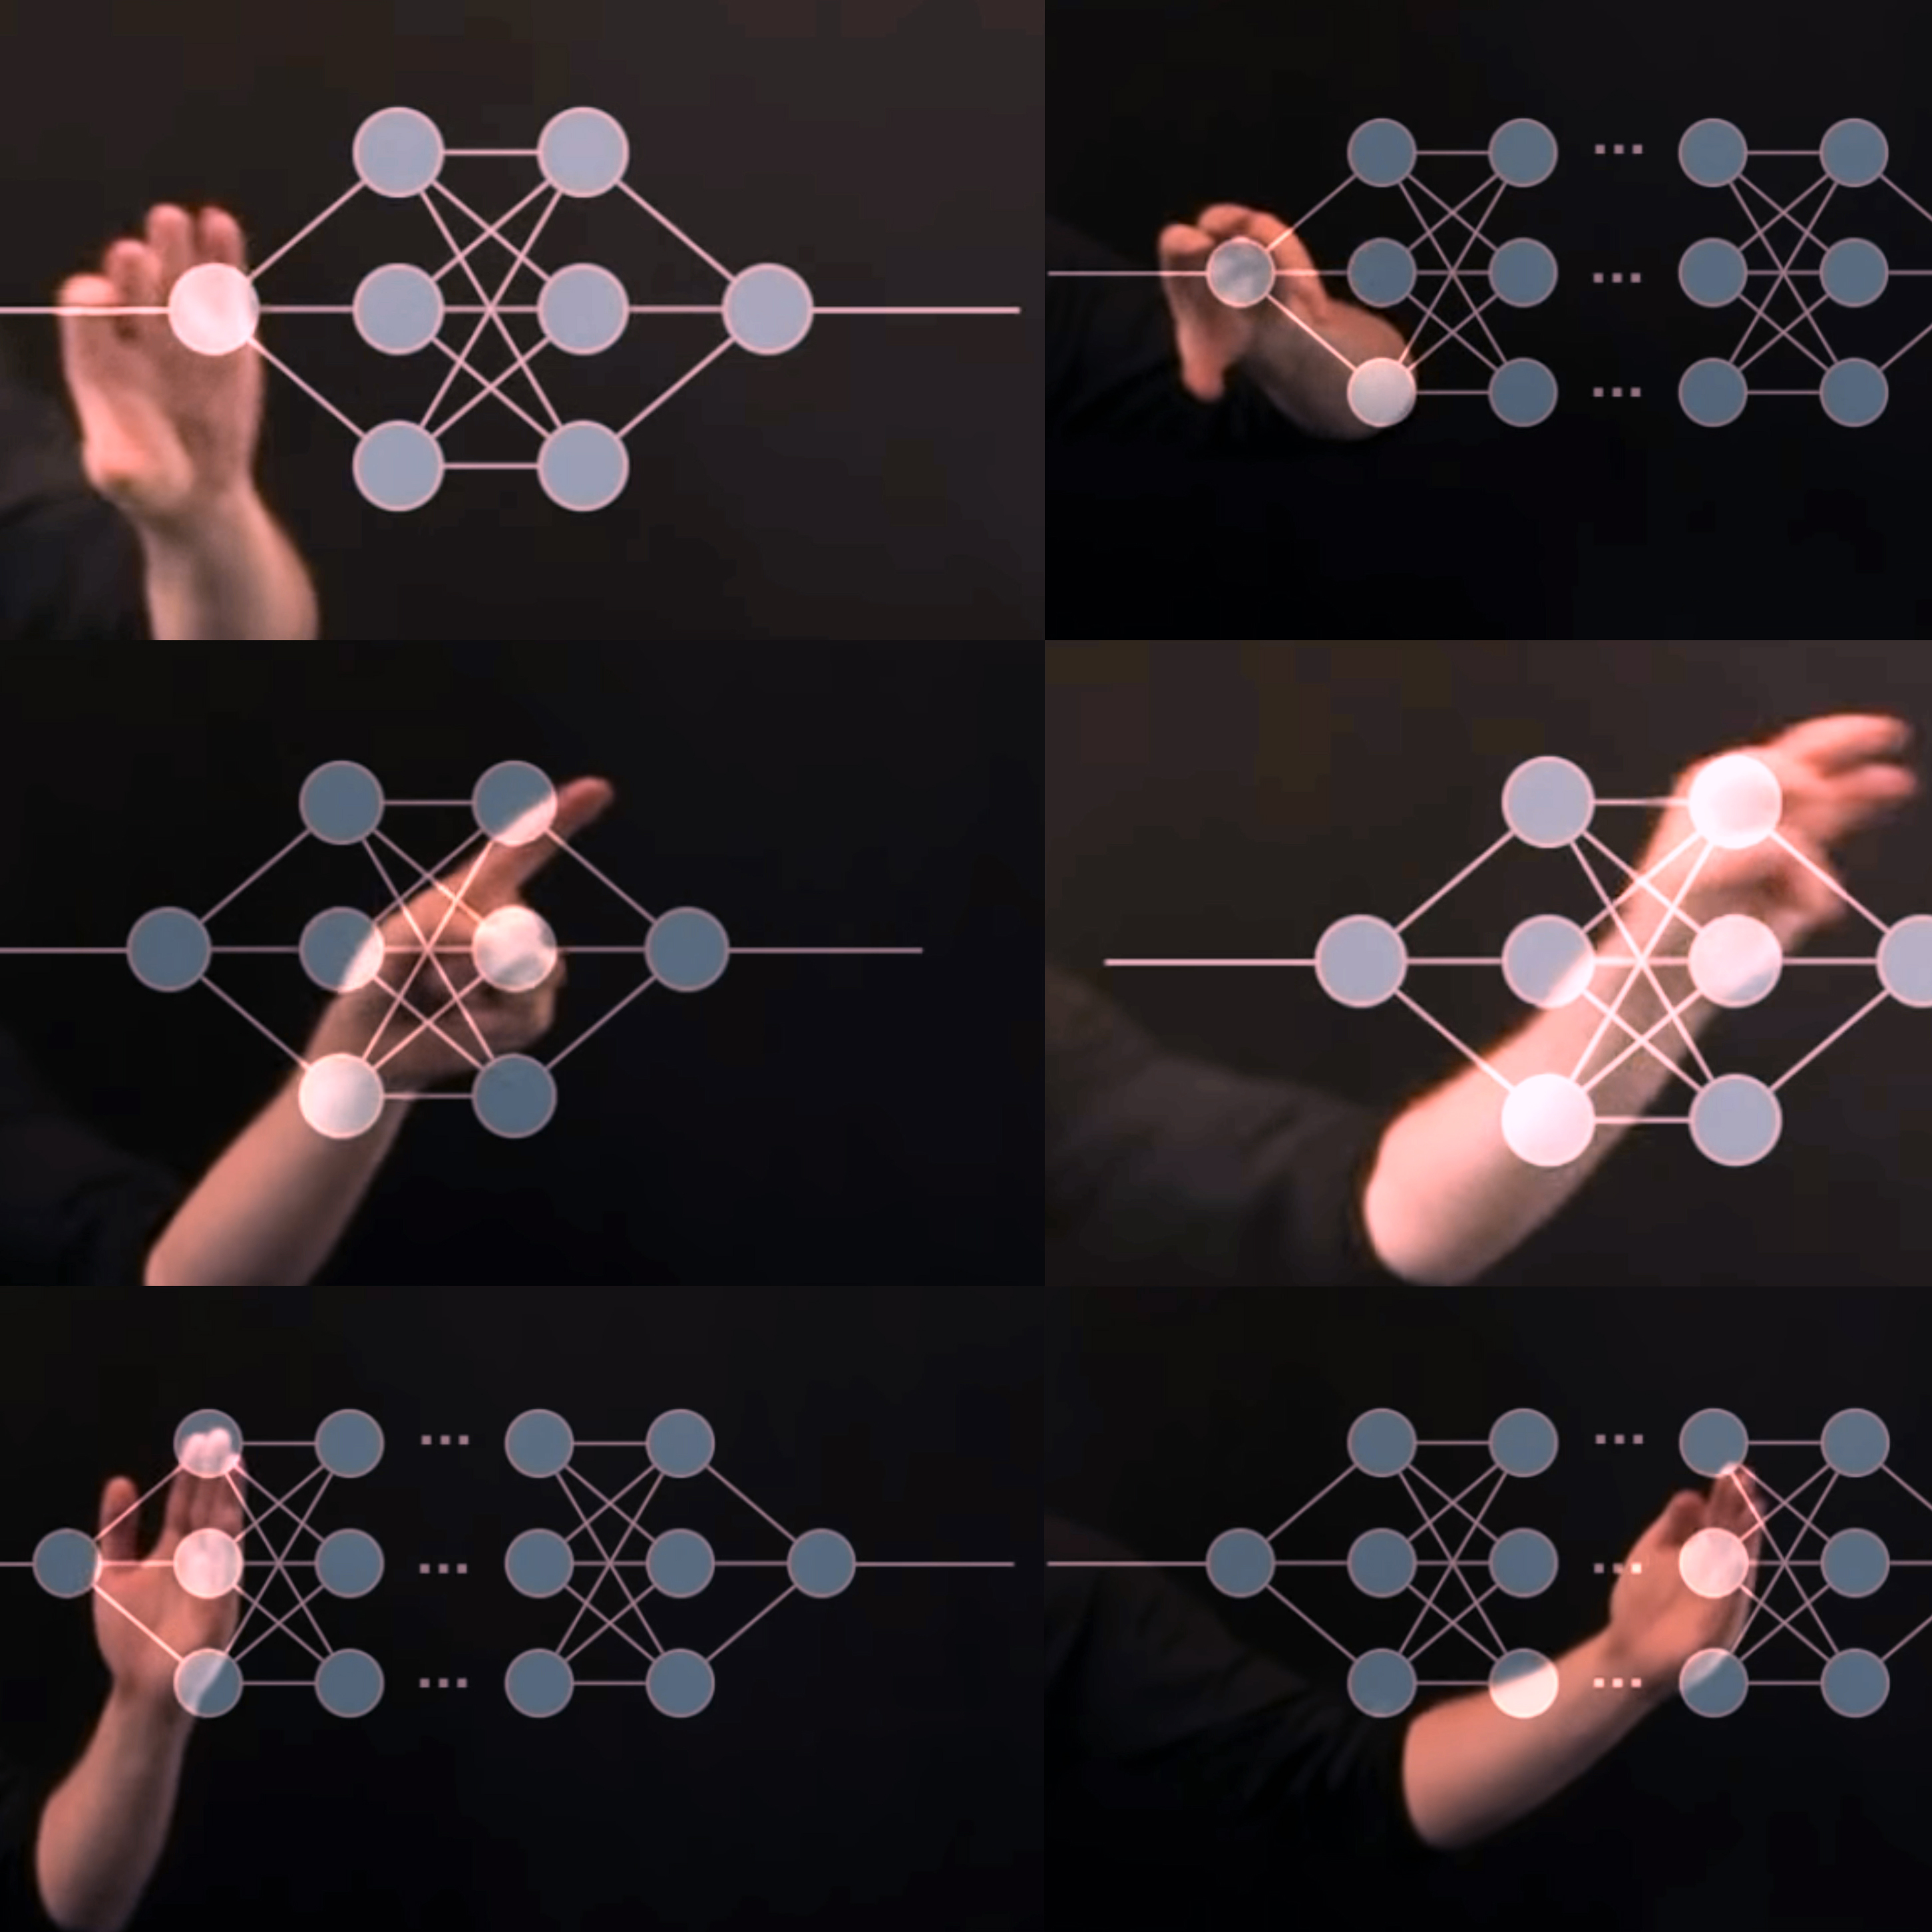 Hands and neural networks